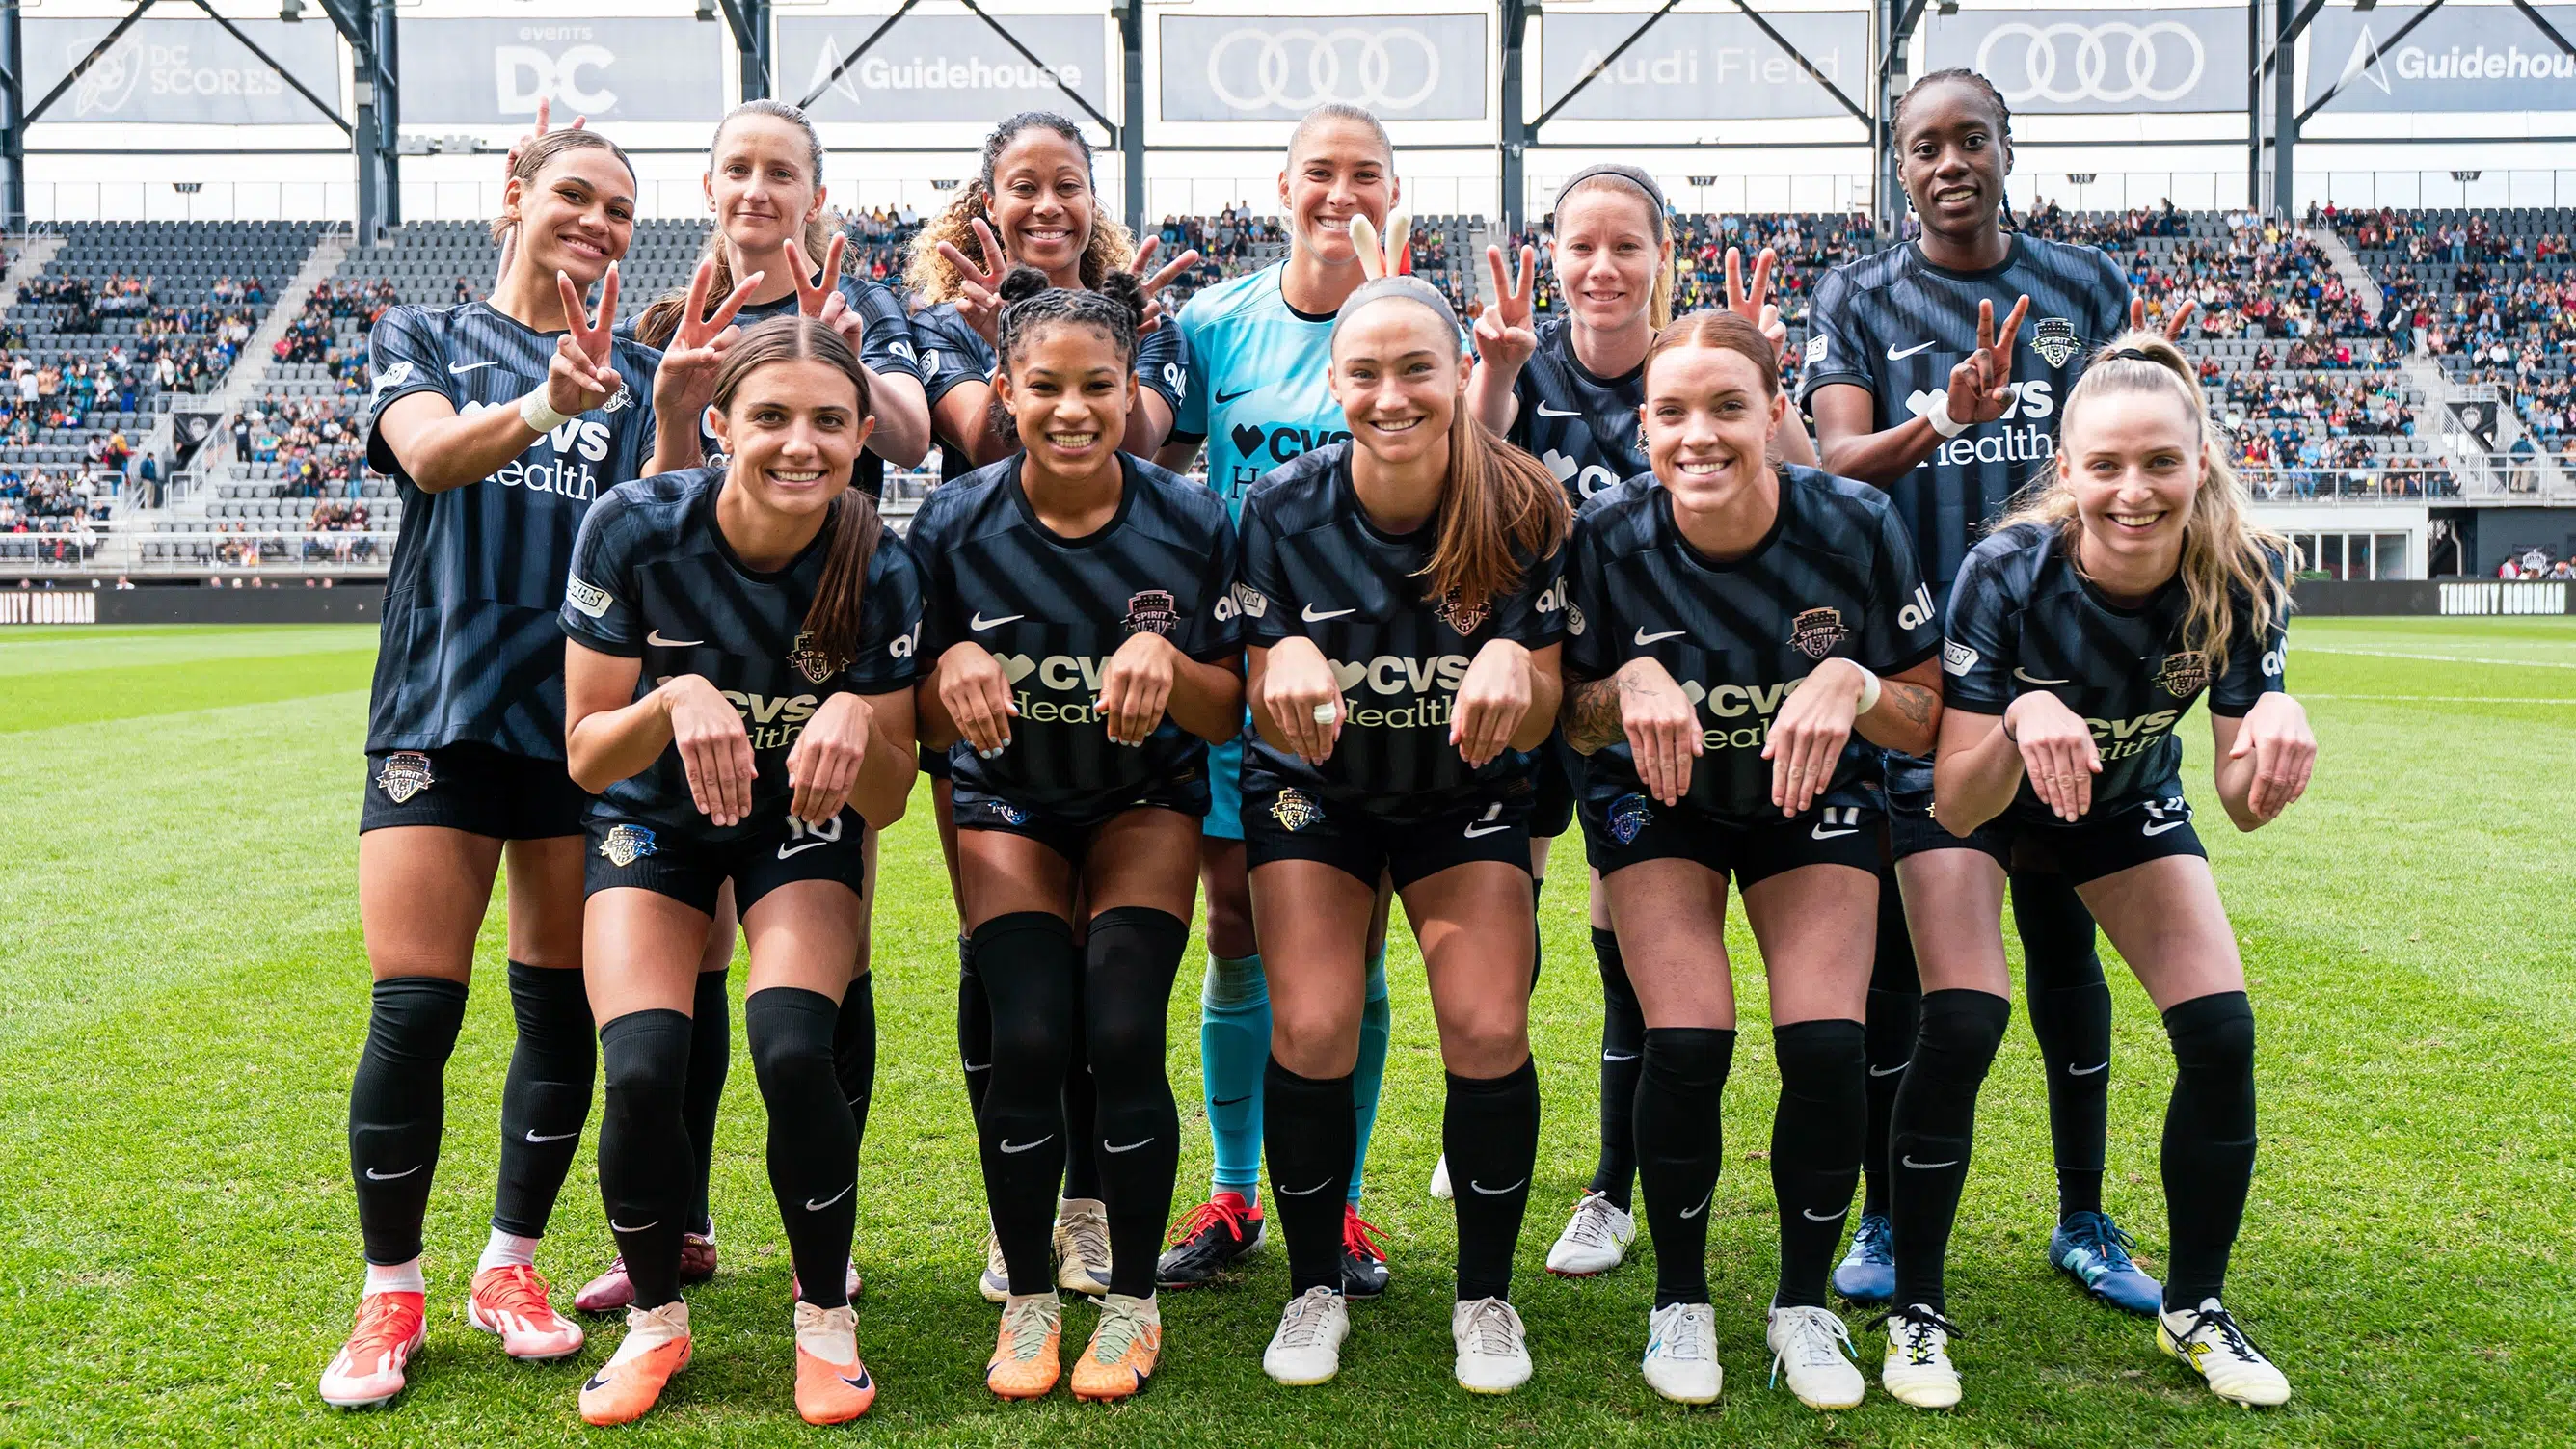 The starting eleven of the Washington Spirit pose in two rows. The first row has their hands posed like paws, and the back row puts 